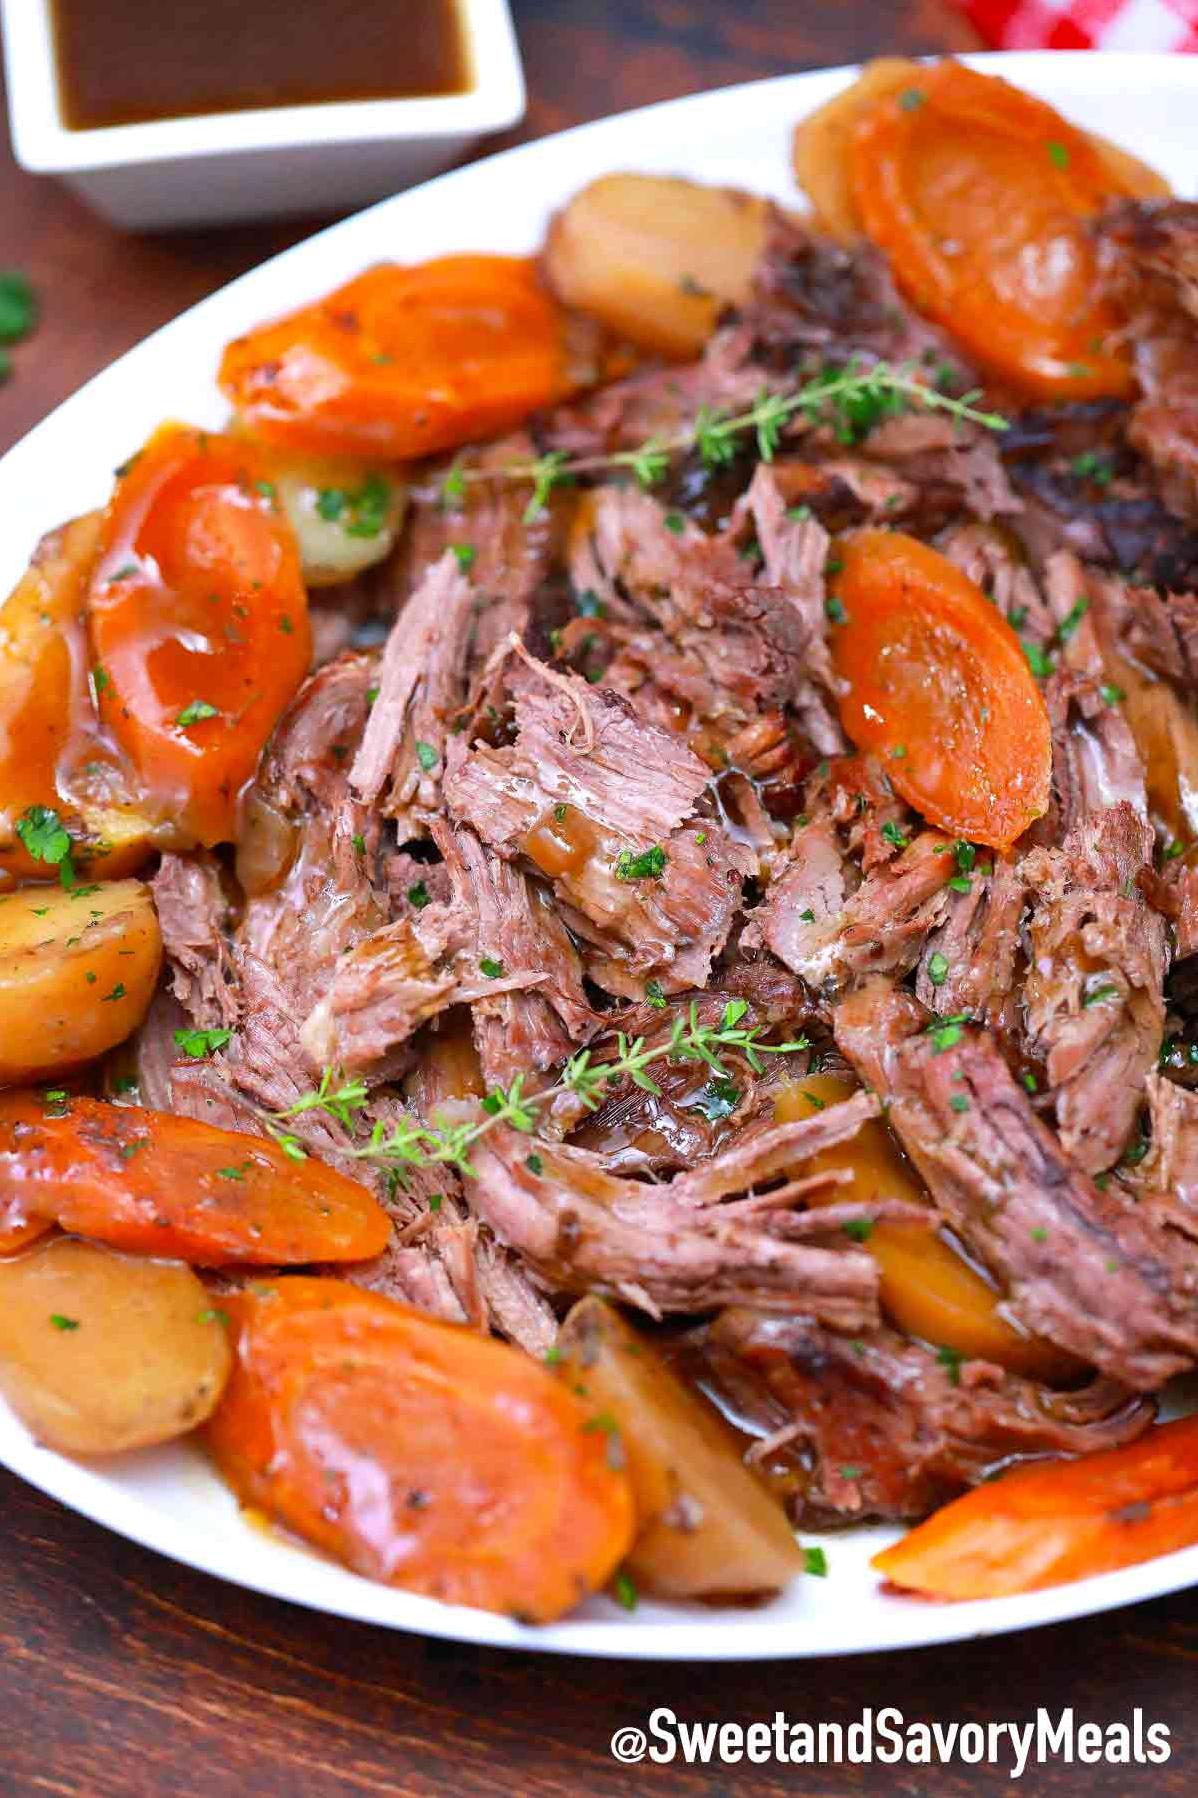  Slow-cooked to perfection, this dish is sure to warm you up on a chilly day